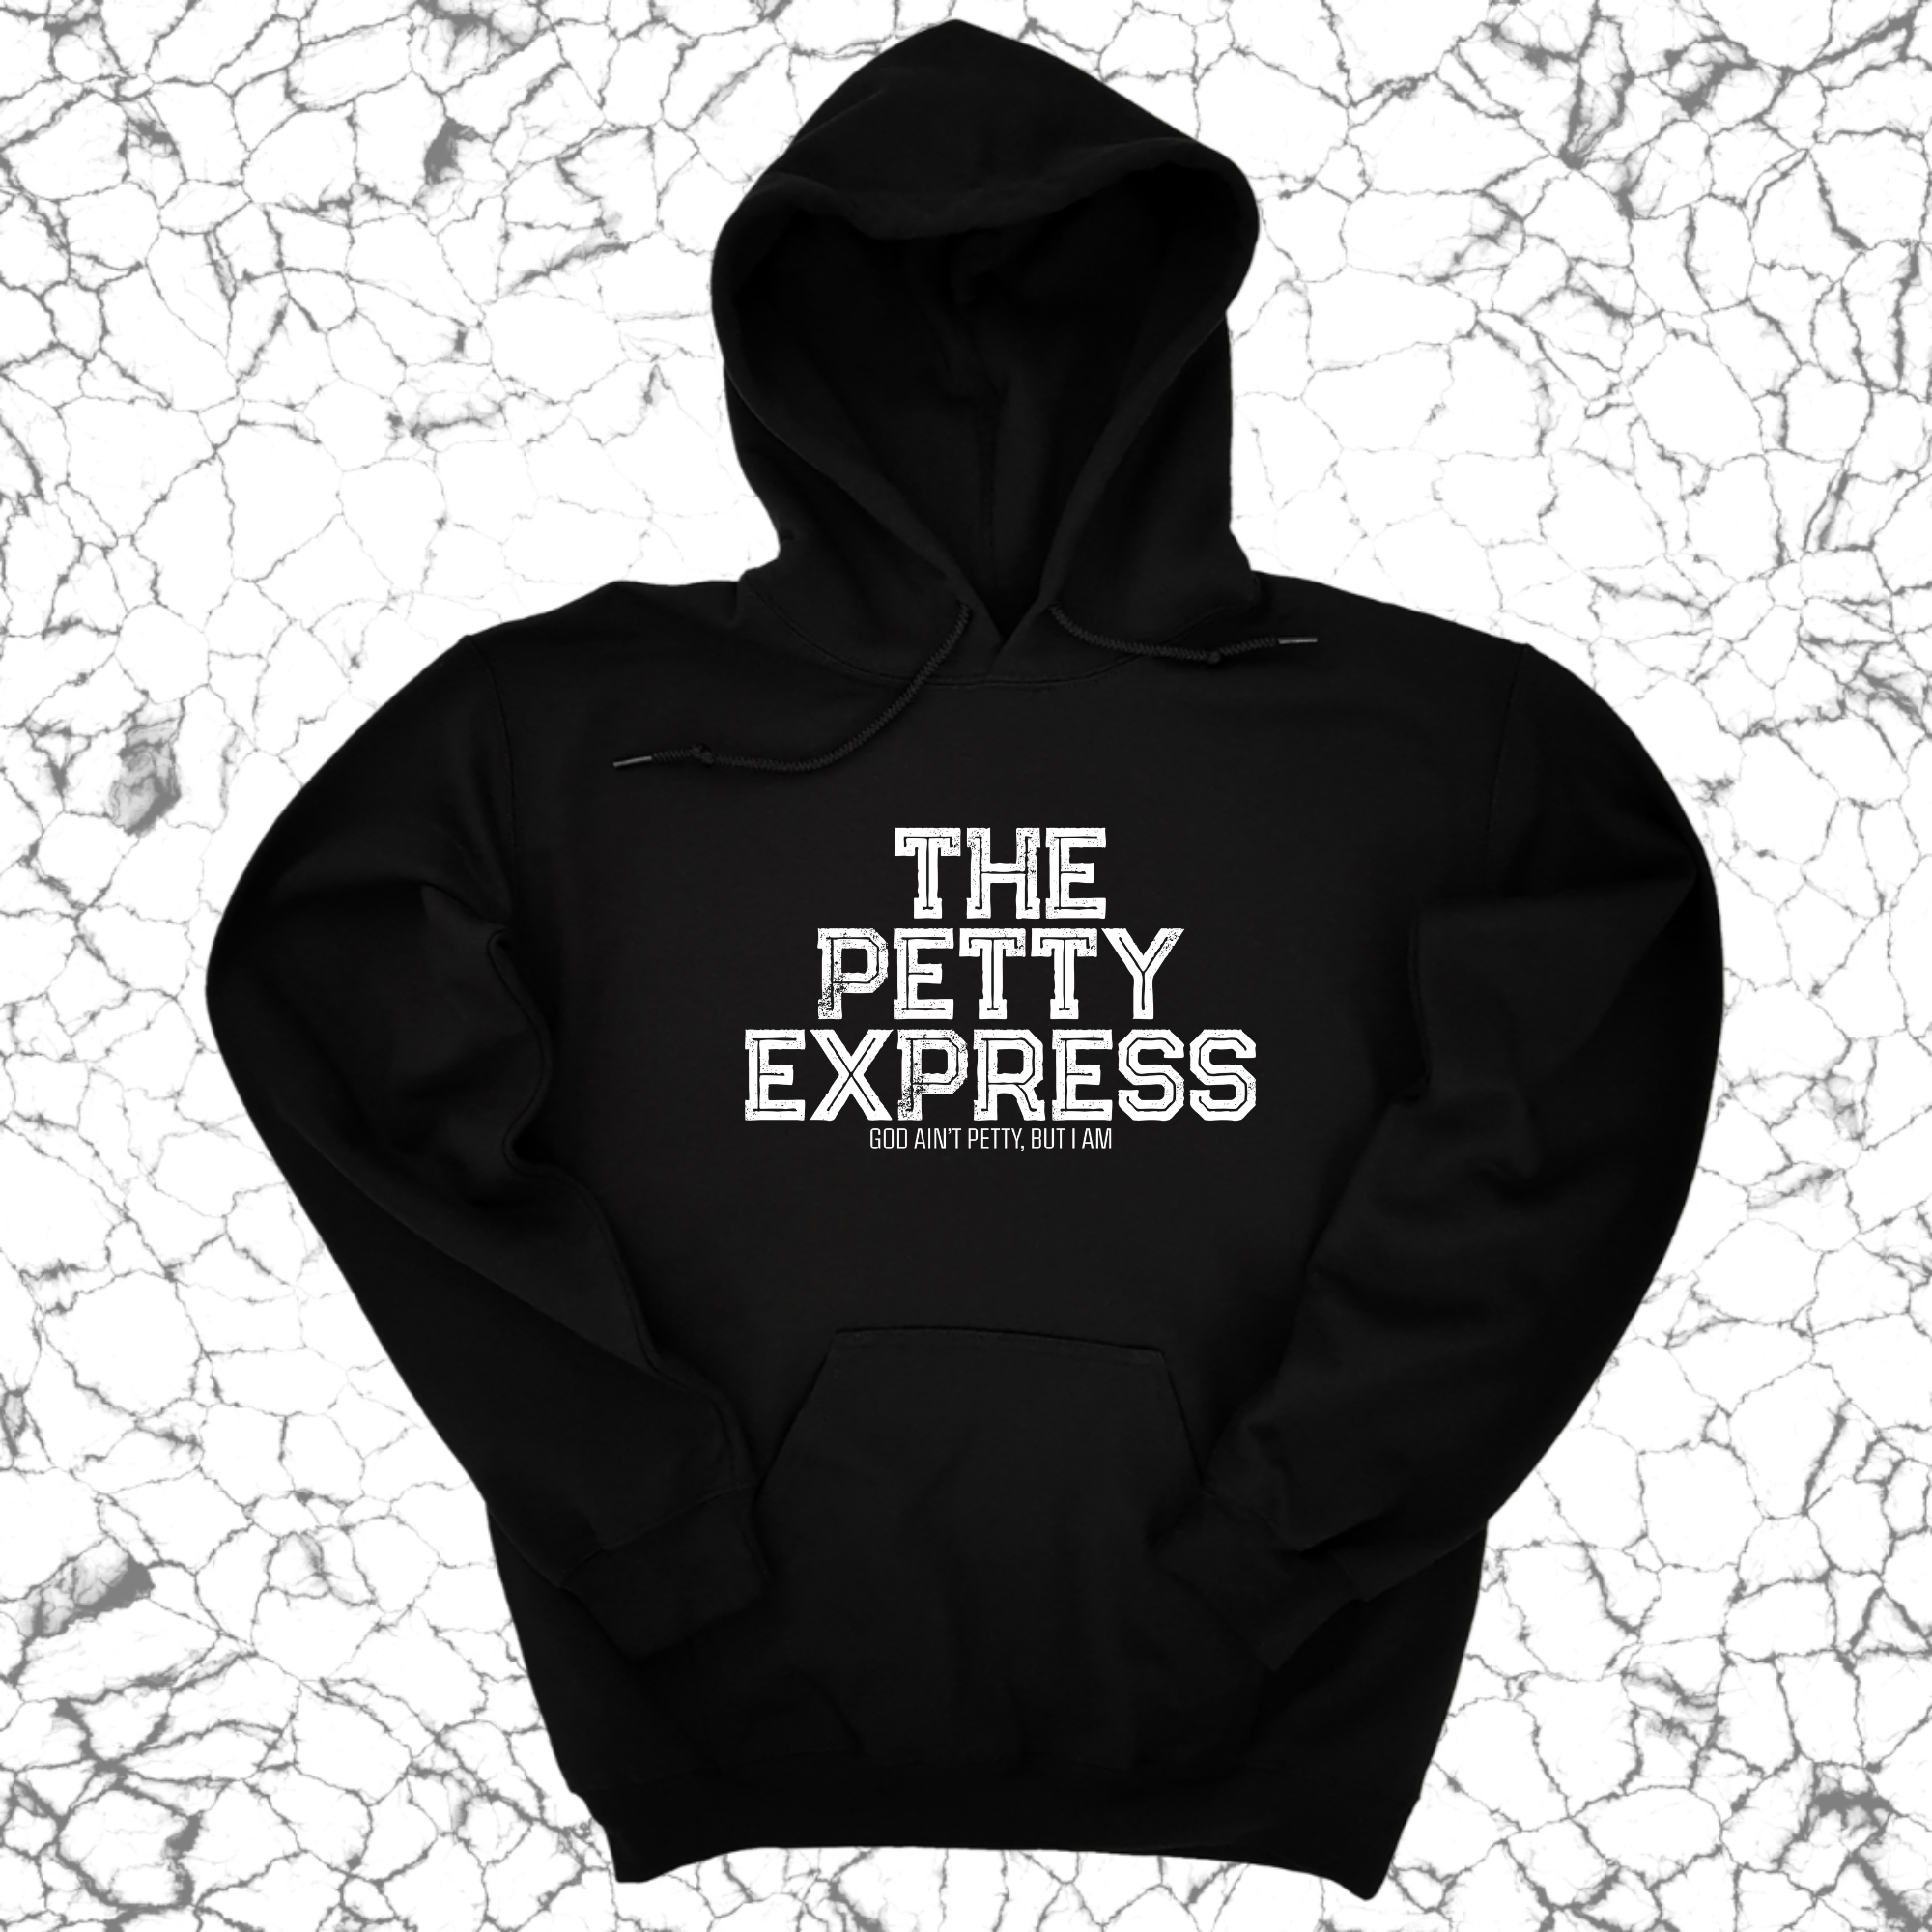 The Petty Express Unisex Hoodie-Hoodie-The Original God Ain't Petty But I Am